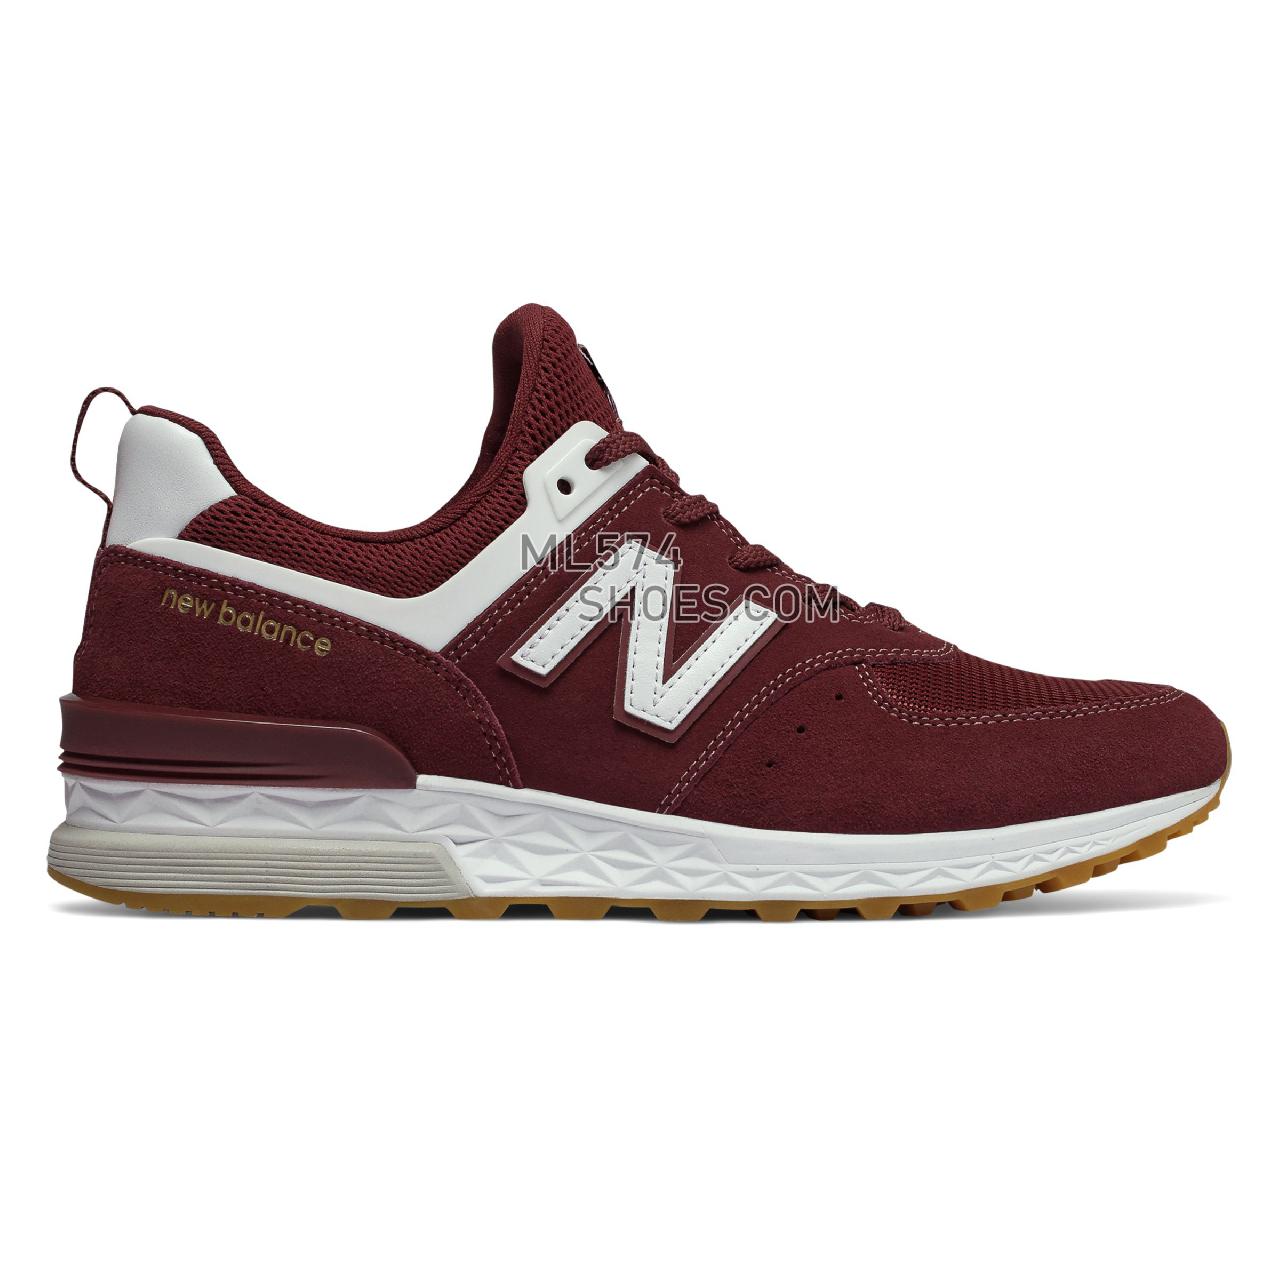 New Balance 574 Sport - Men's 574 - Classic Burgundy with White - MS574FCW